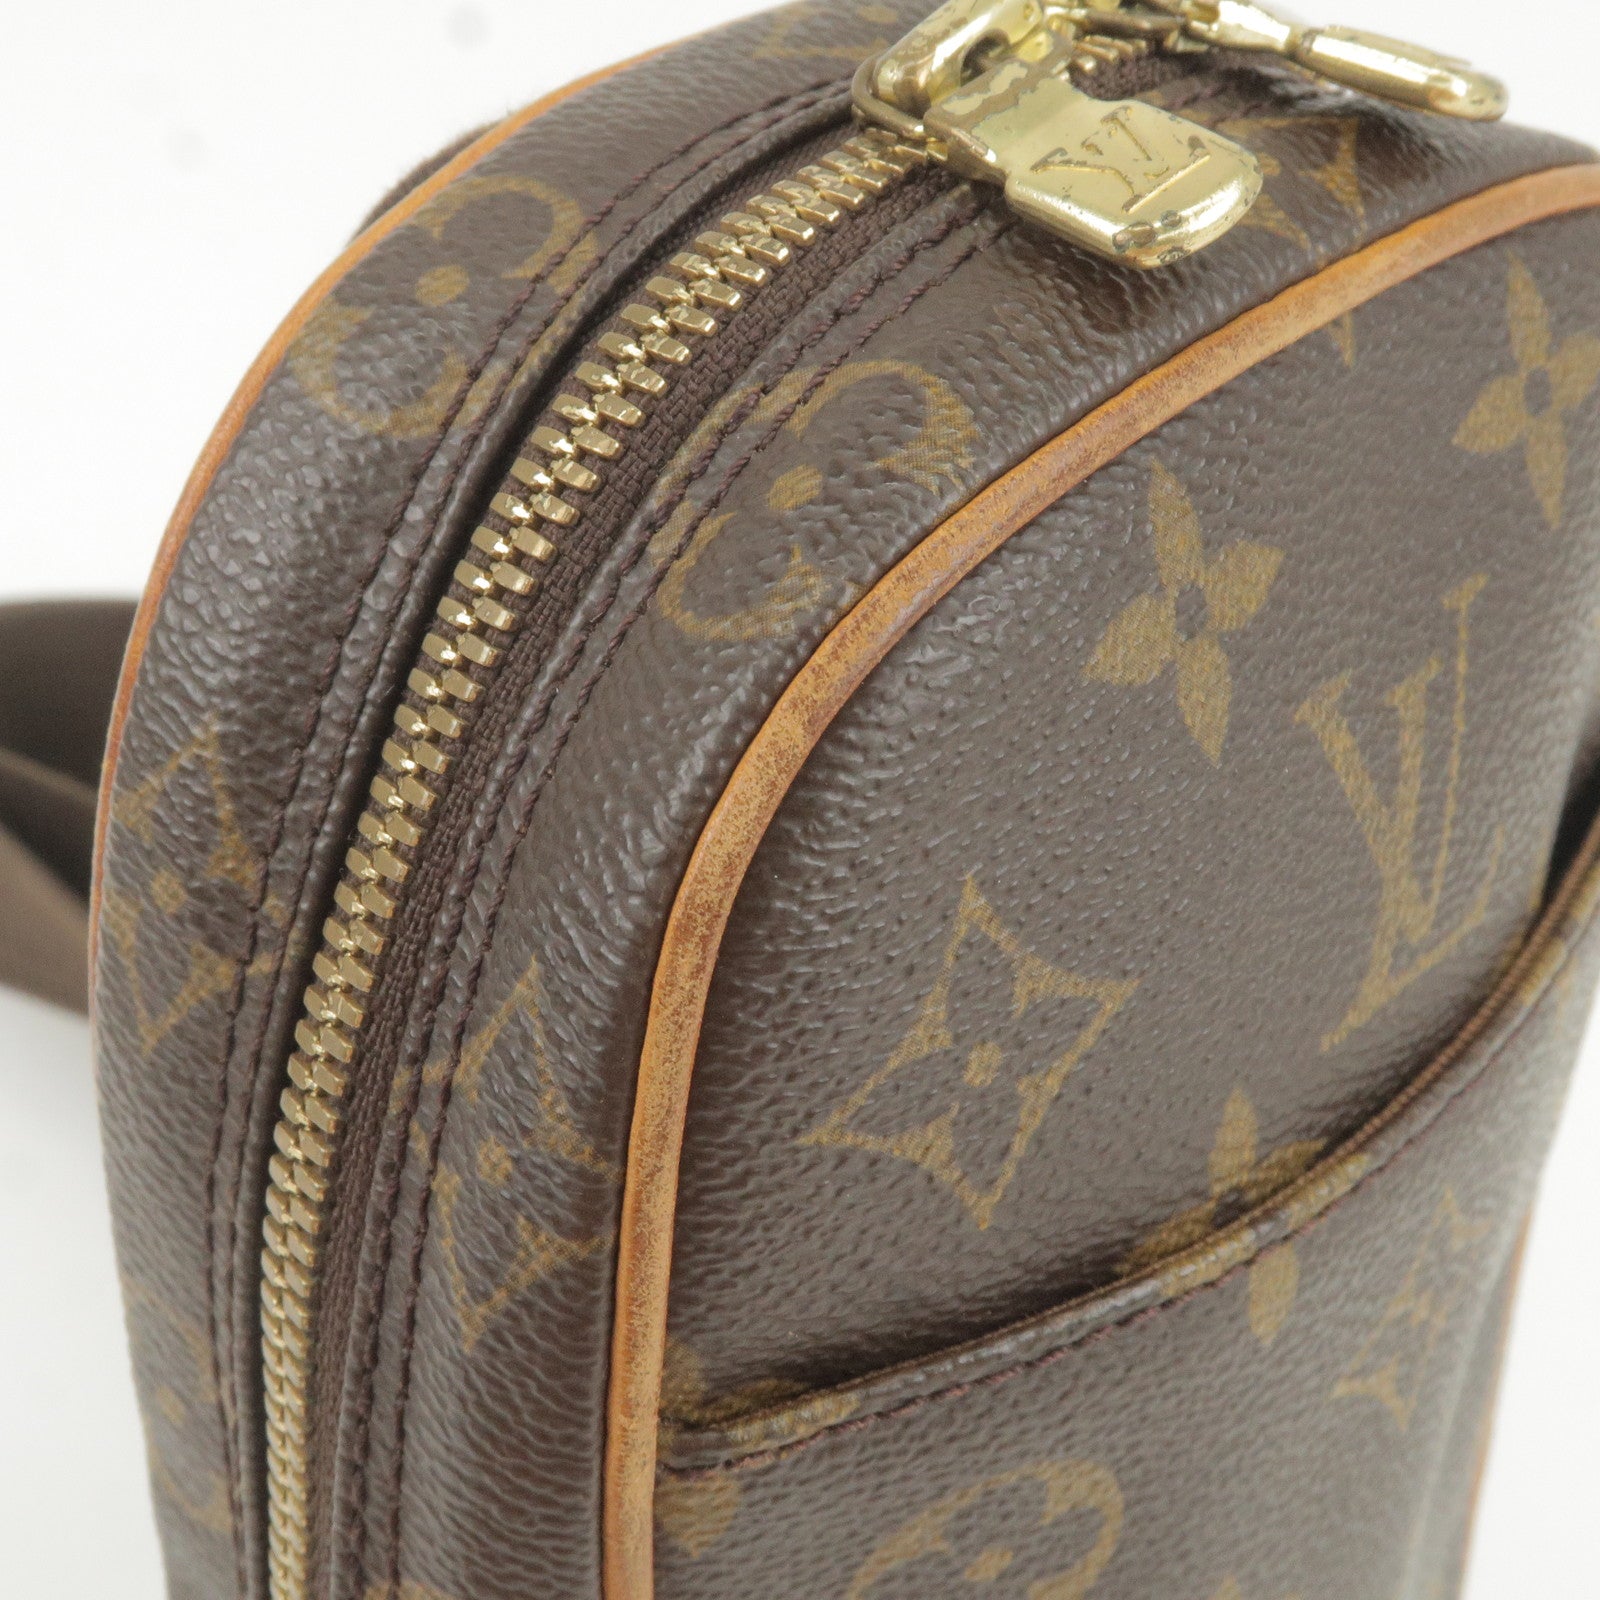 Buy Free Shipping Authentic Pre-owned Louis Vuitton Monogram Poche